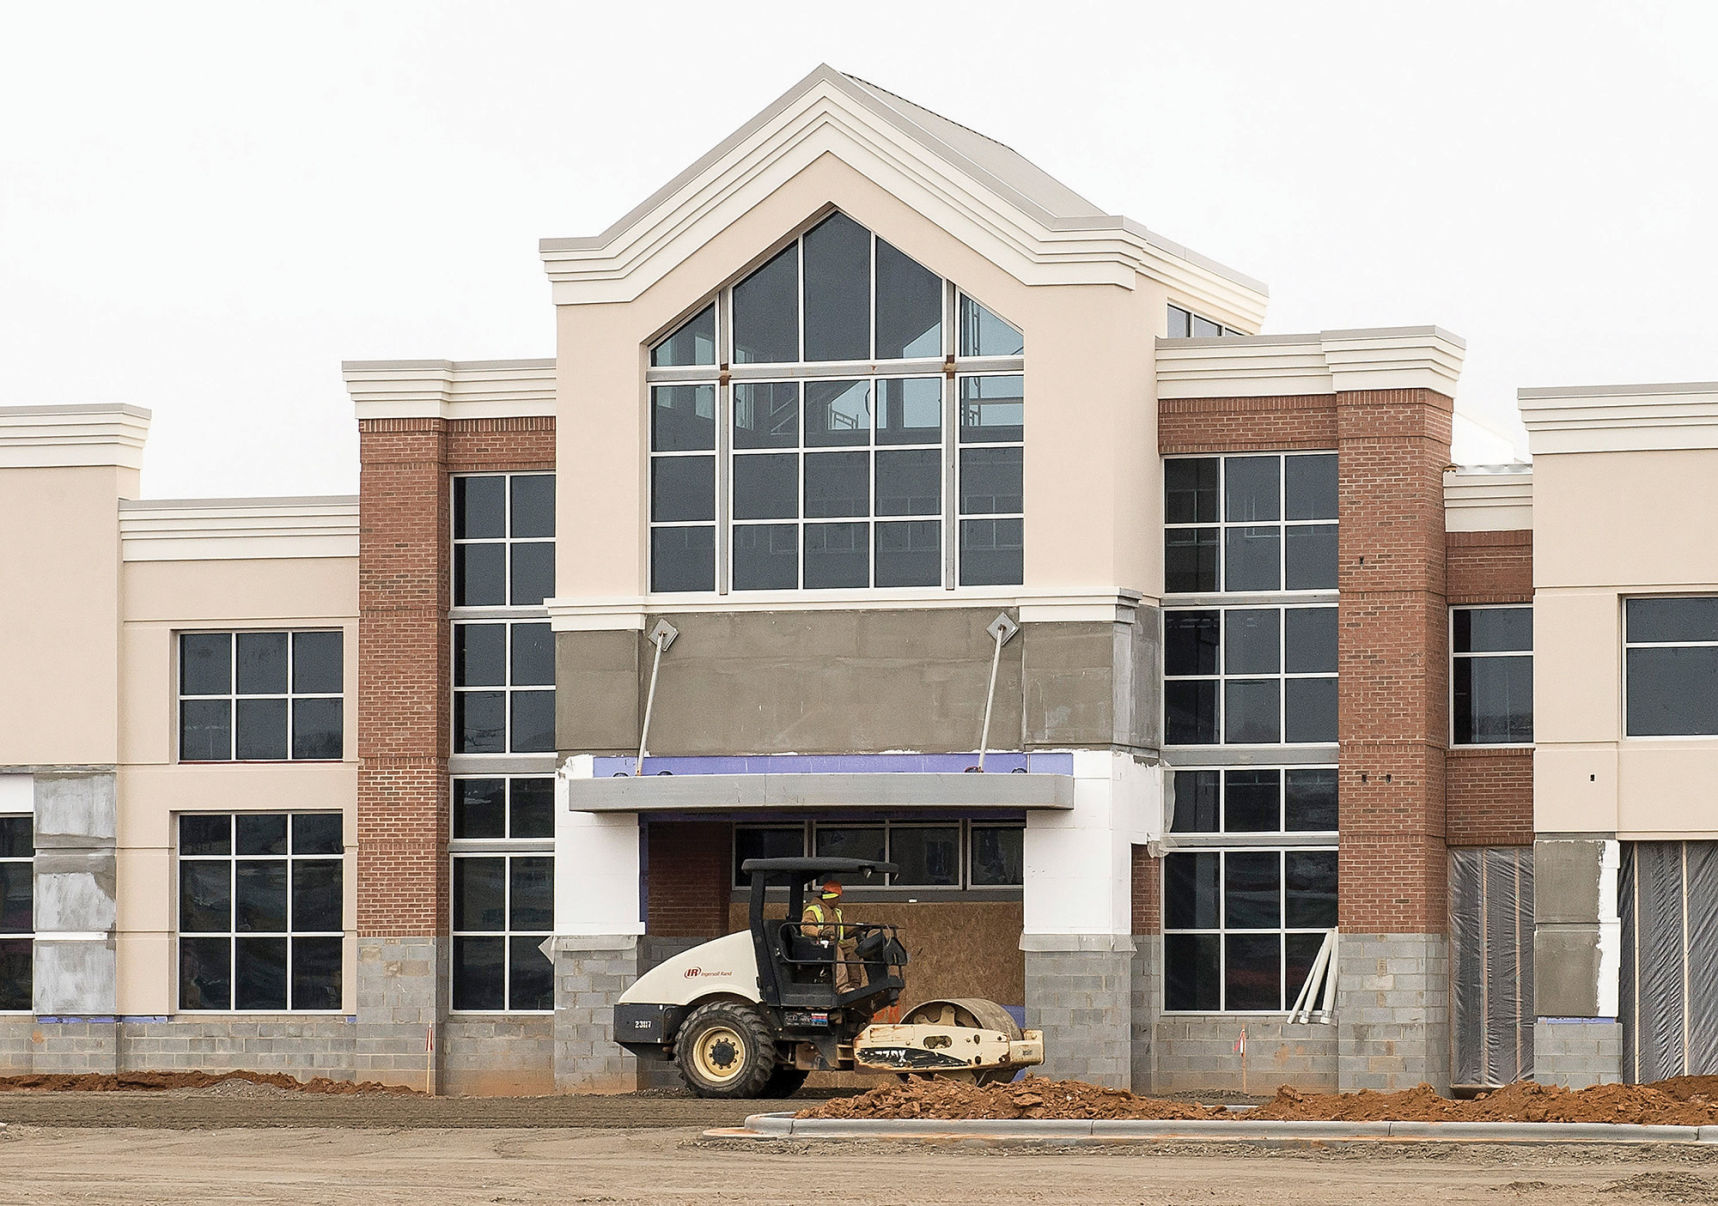 Ingles aims for March opening in Statesville